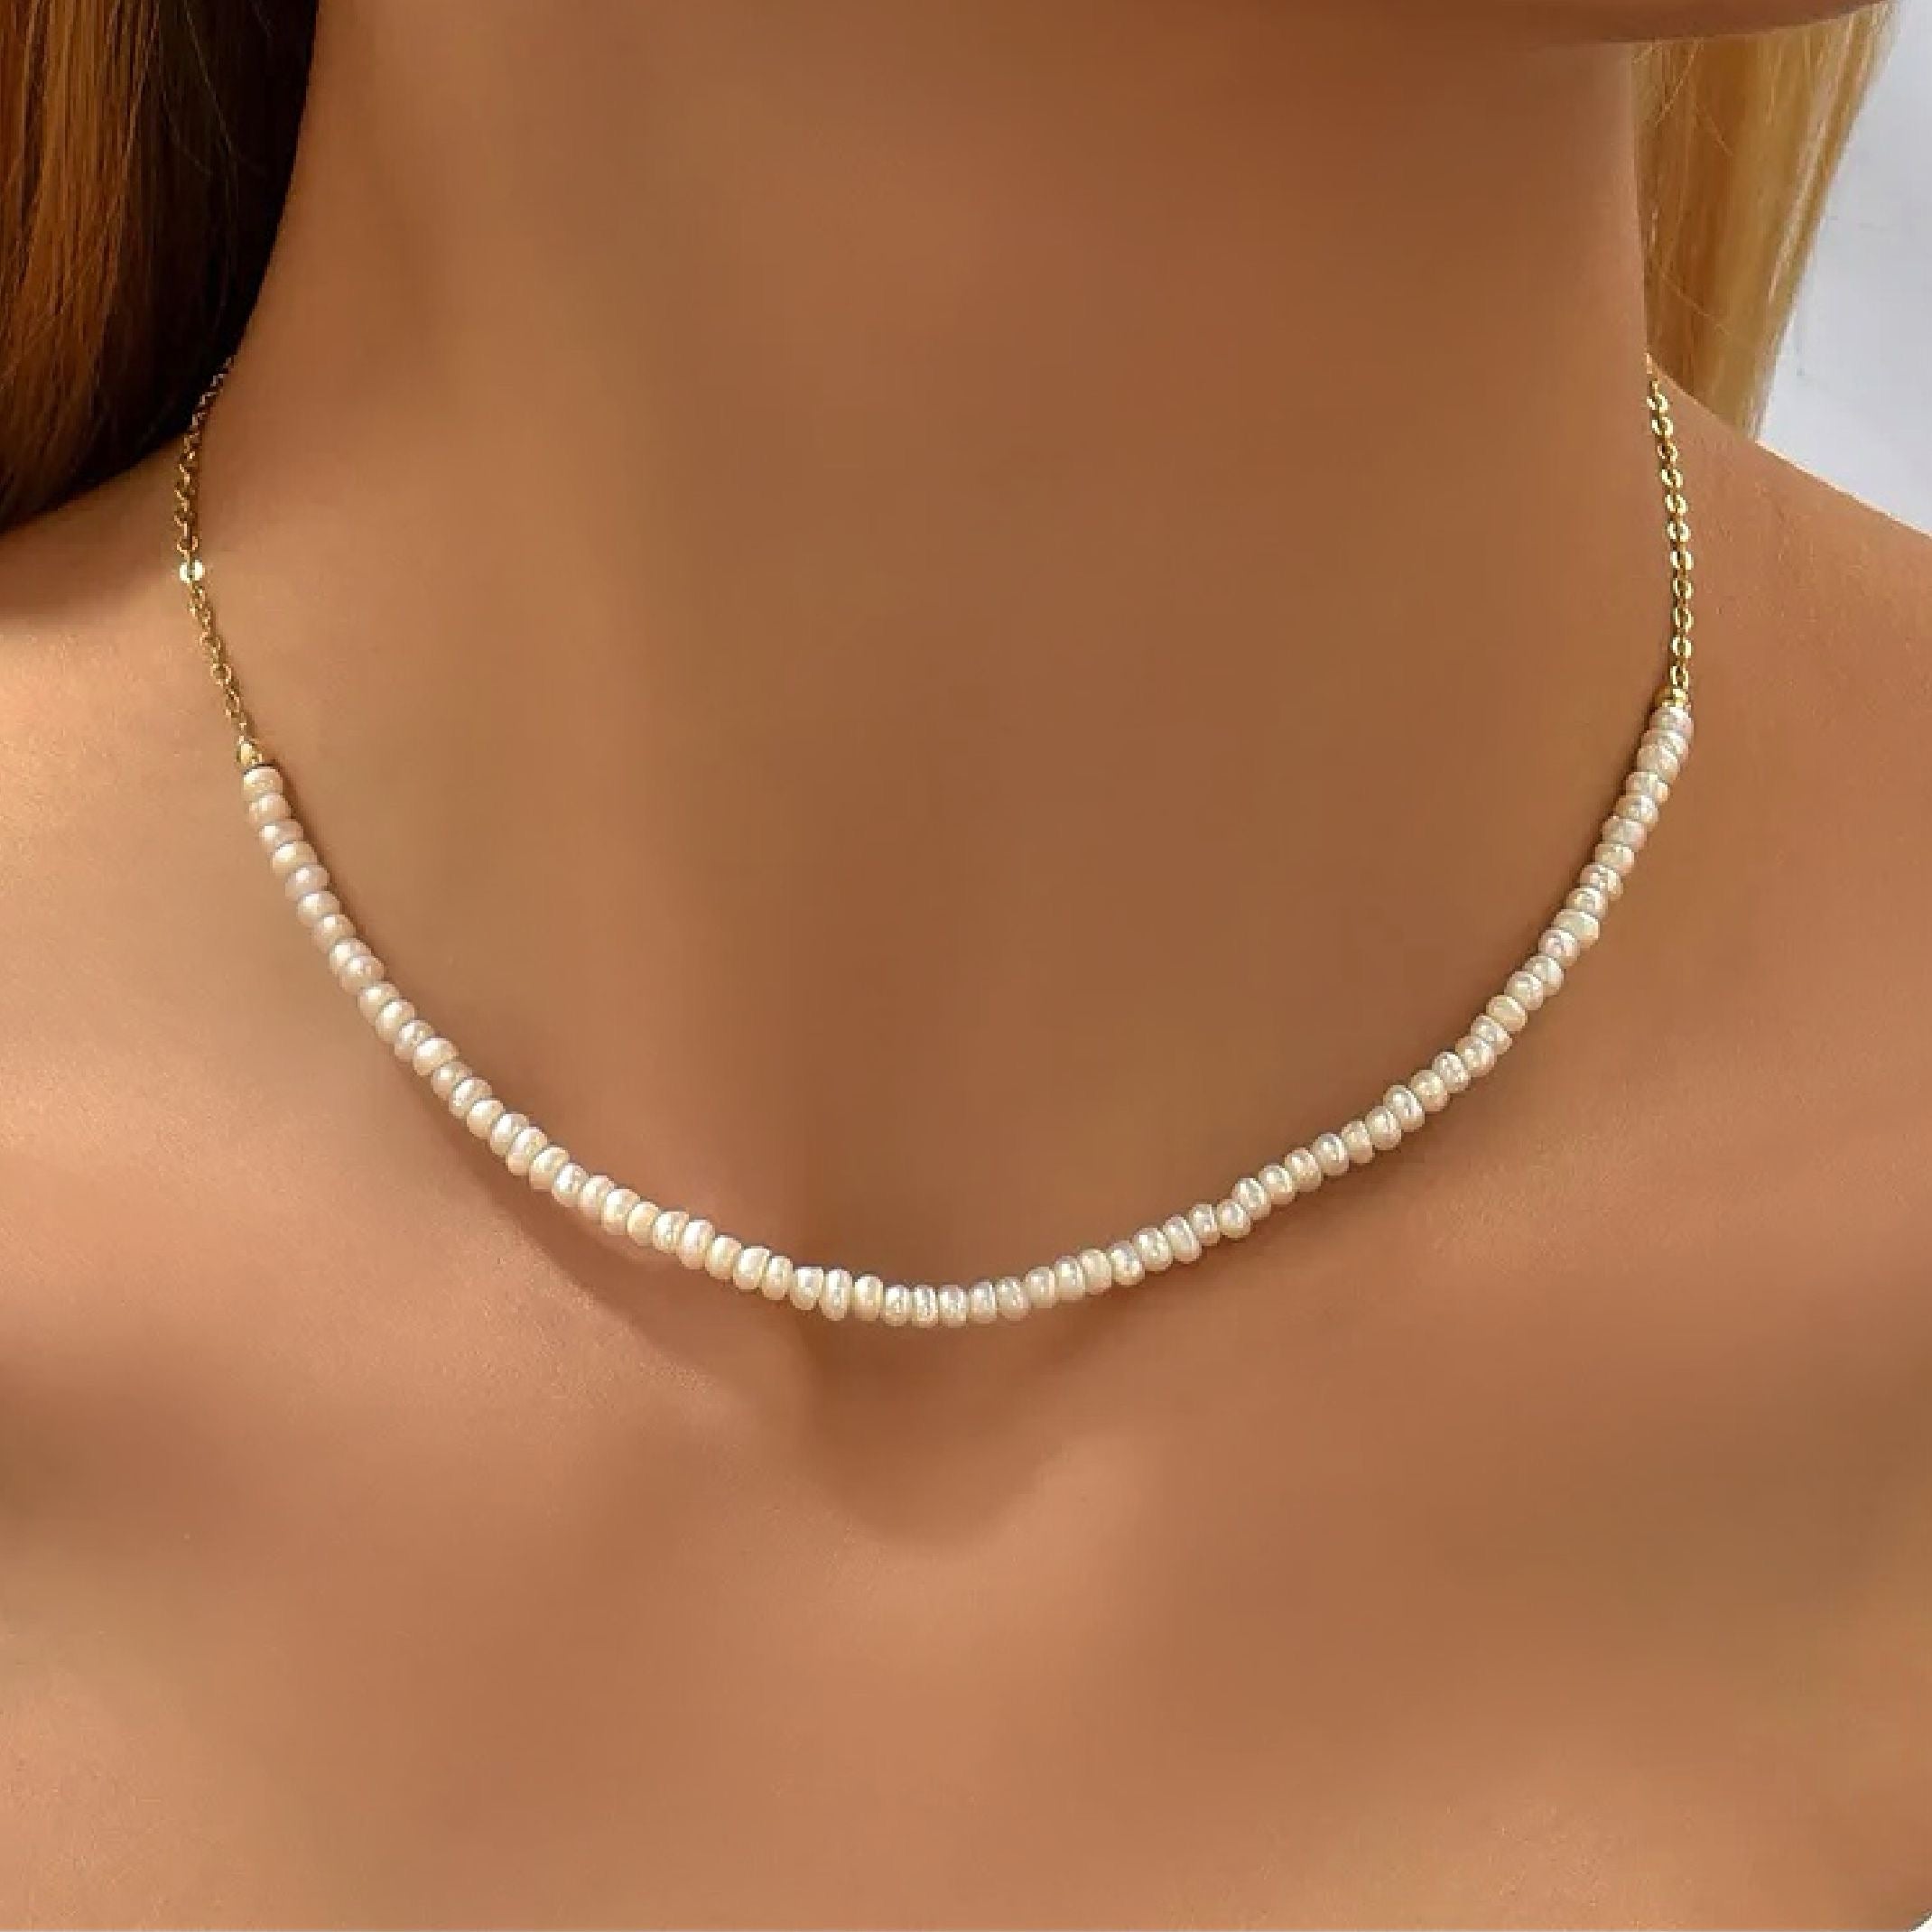 Pearl chain necklace 